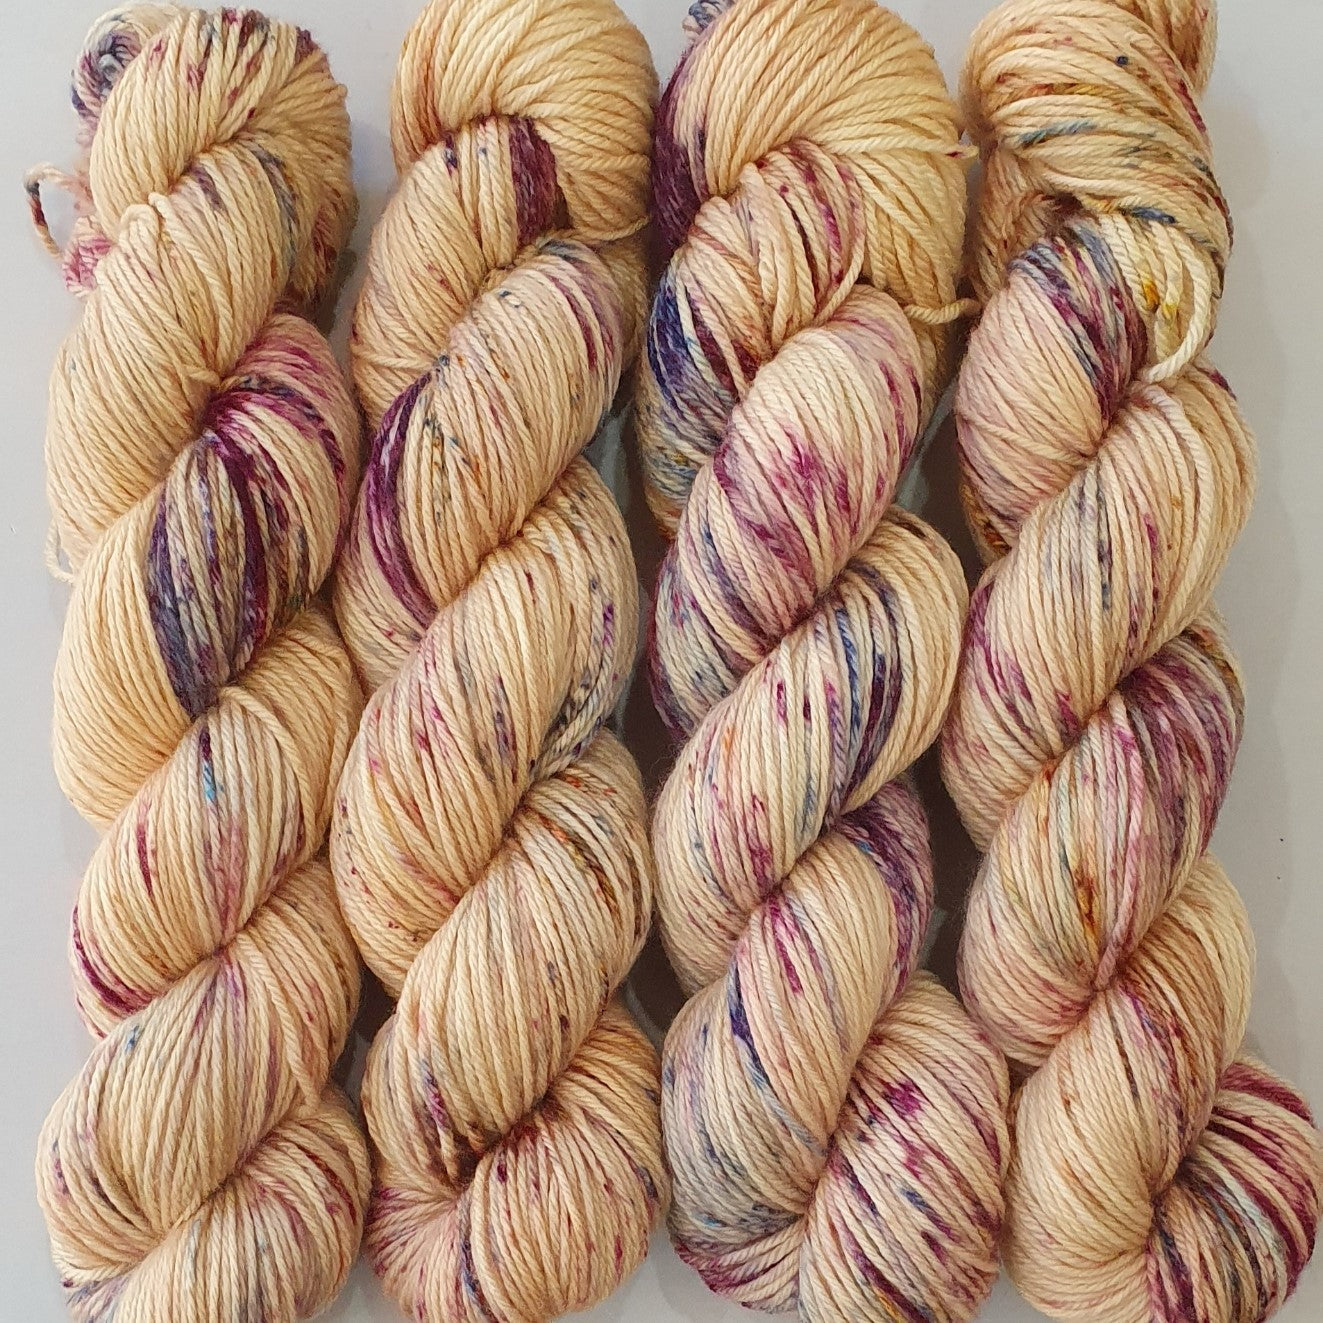 Farewell To Summer (Ewe-ge Obsession 8ply DK)